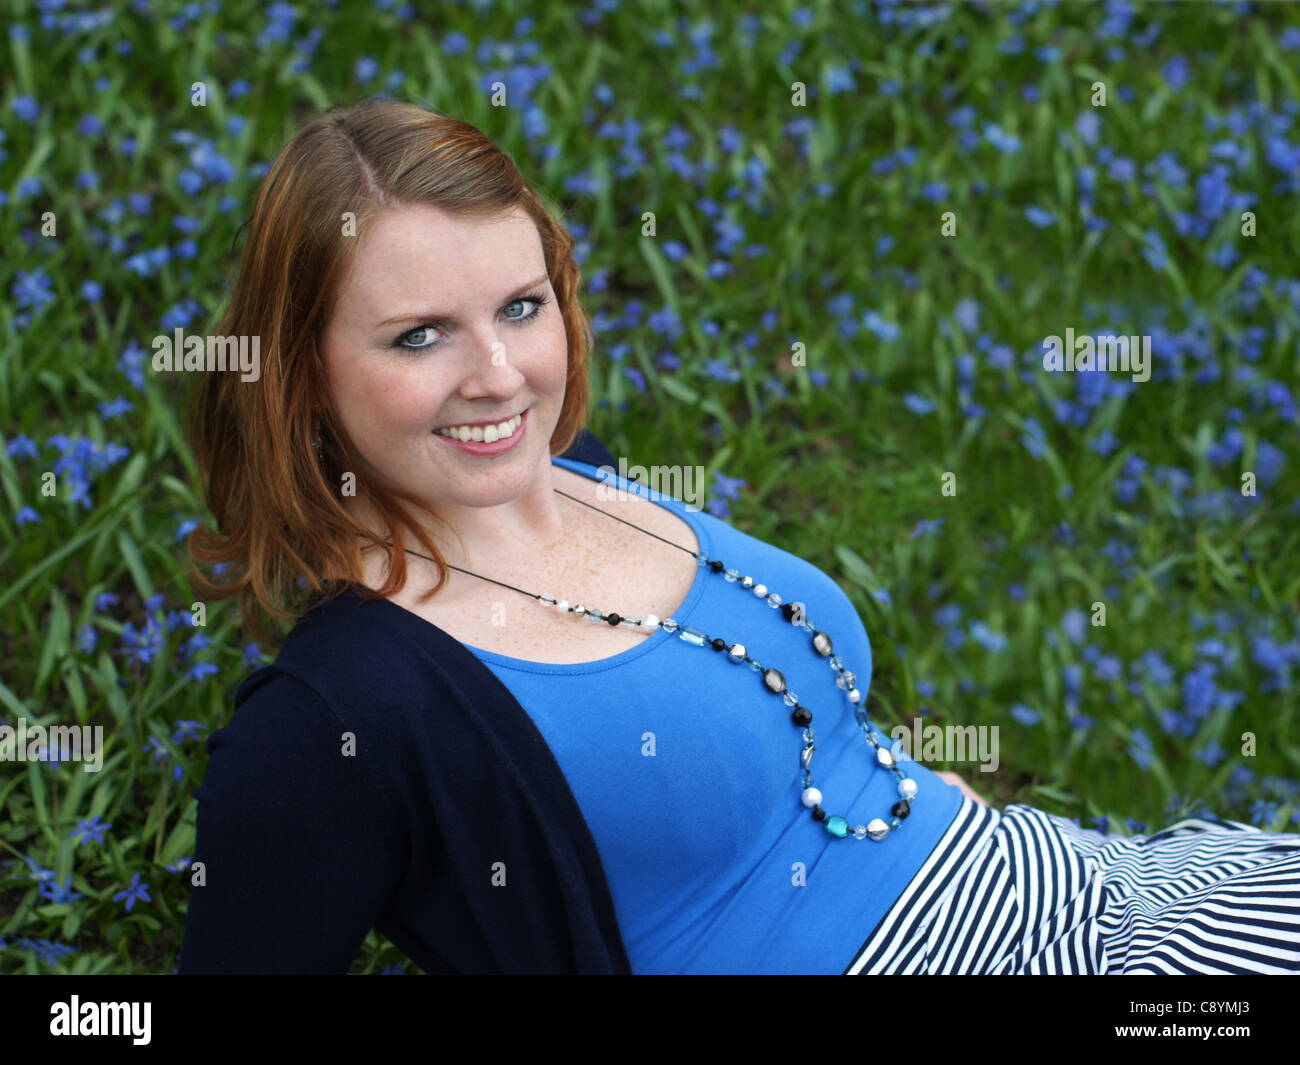 smiling young woman amidst flowers (bluebells) Stock Photo